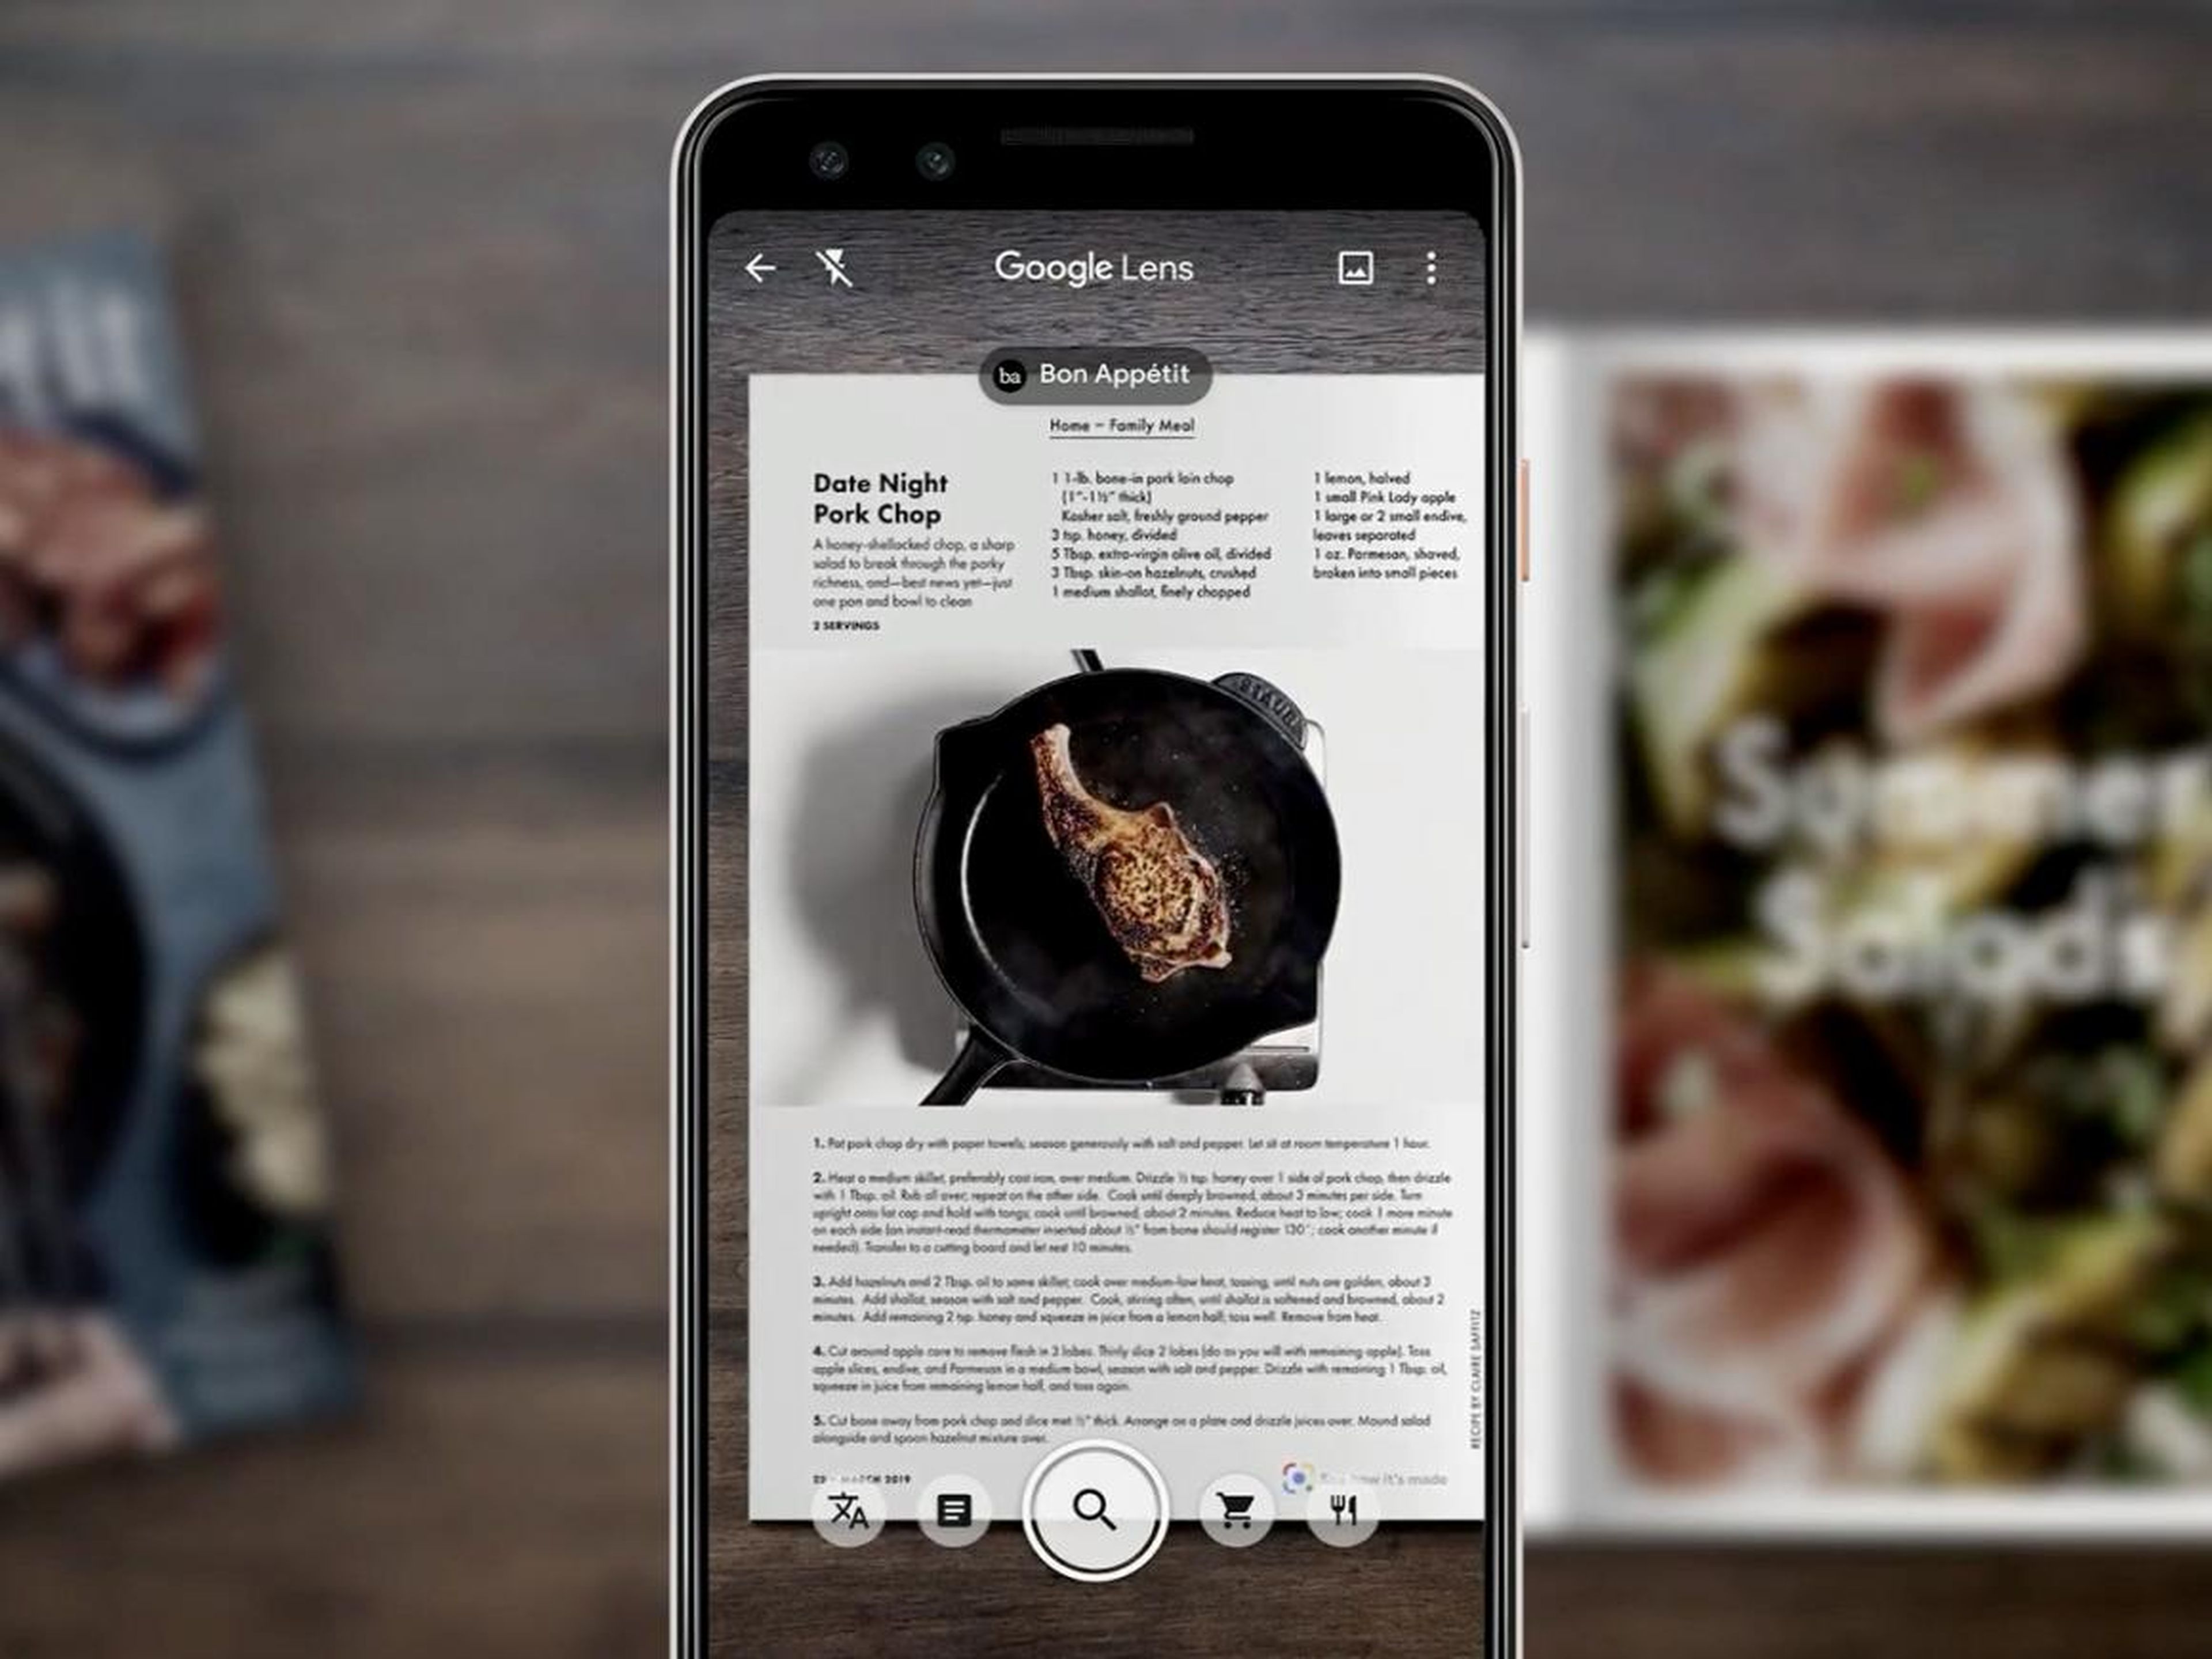 Lens can show you a video of how to prepare a dish when you point your phone's camera at the recipe.